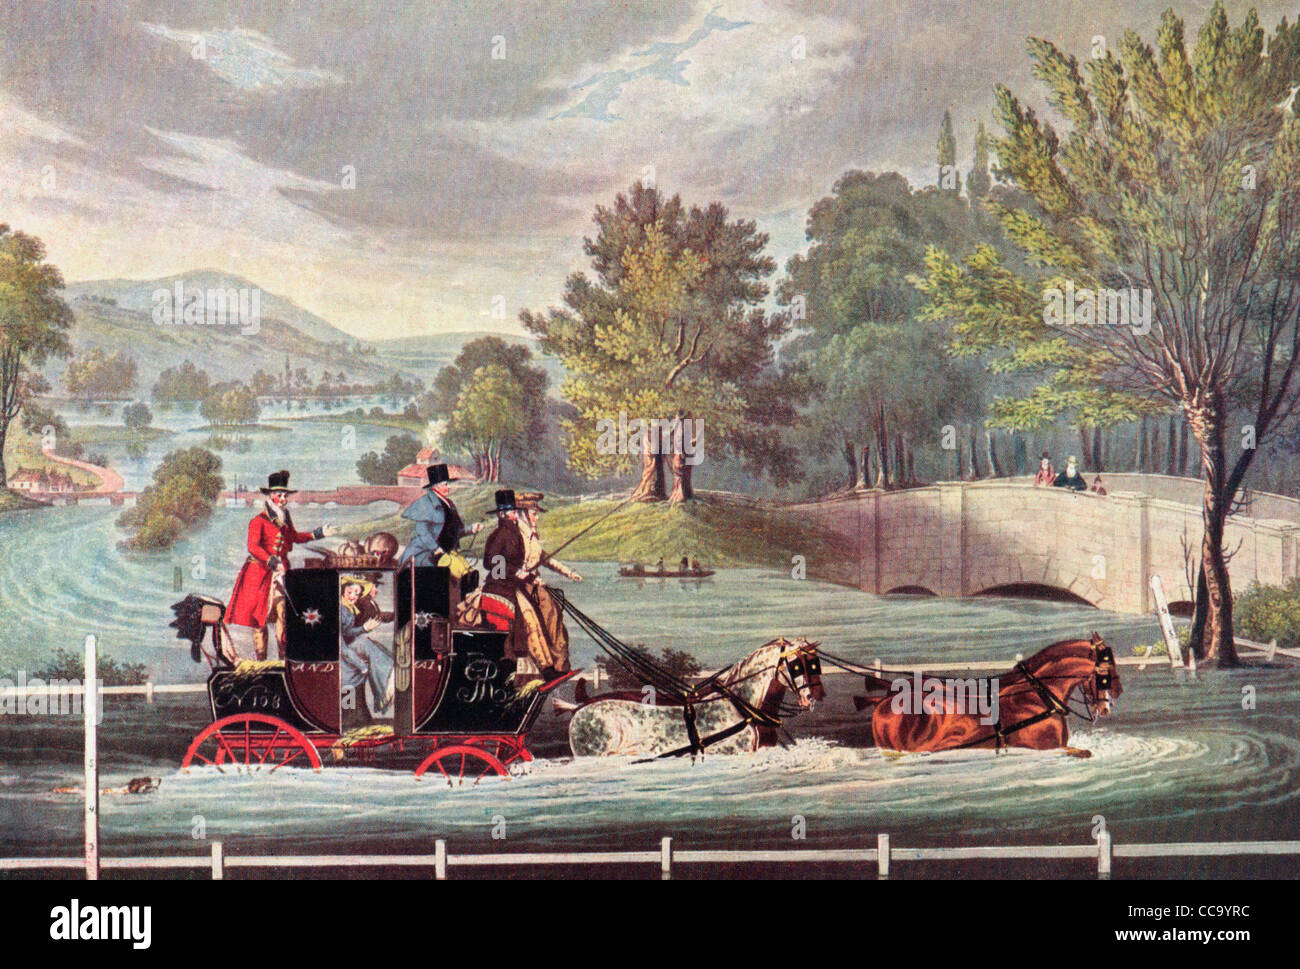 Mail Coach in a flood, England, 1800s Stock Photo